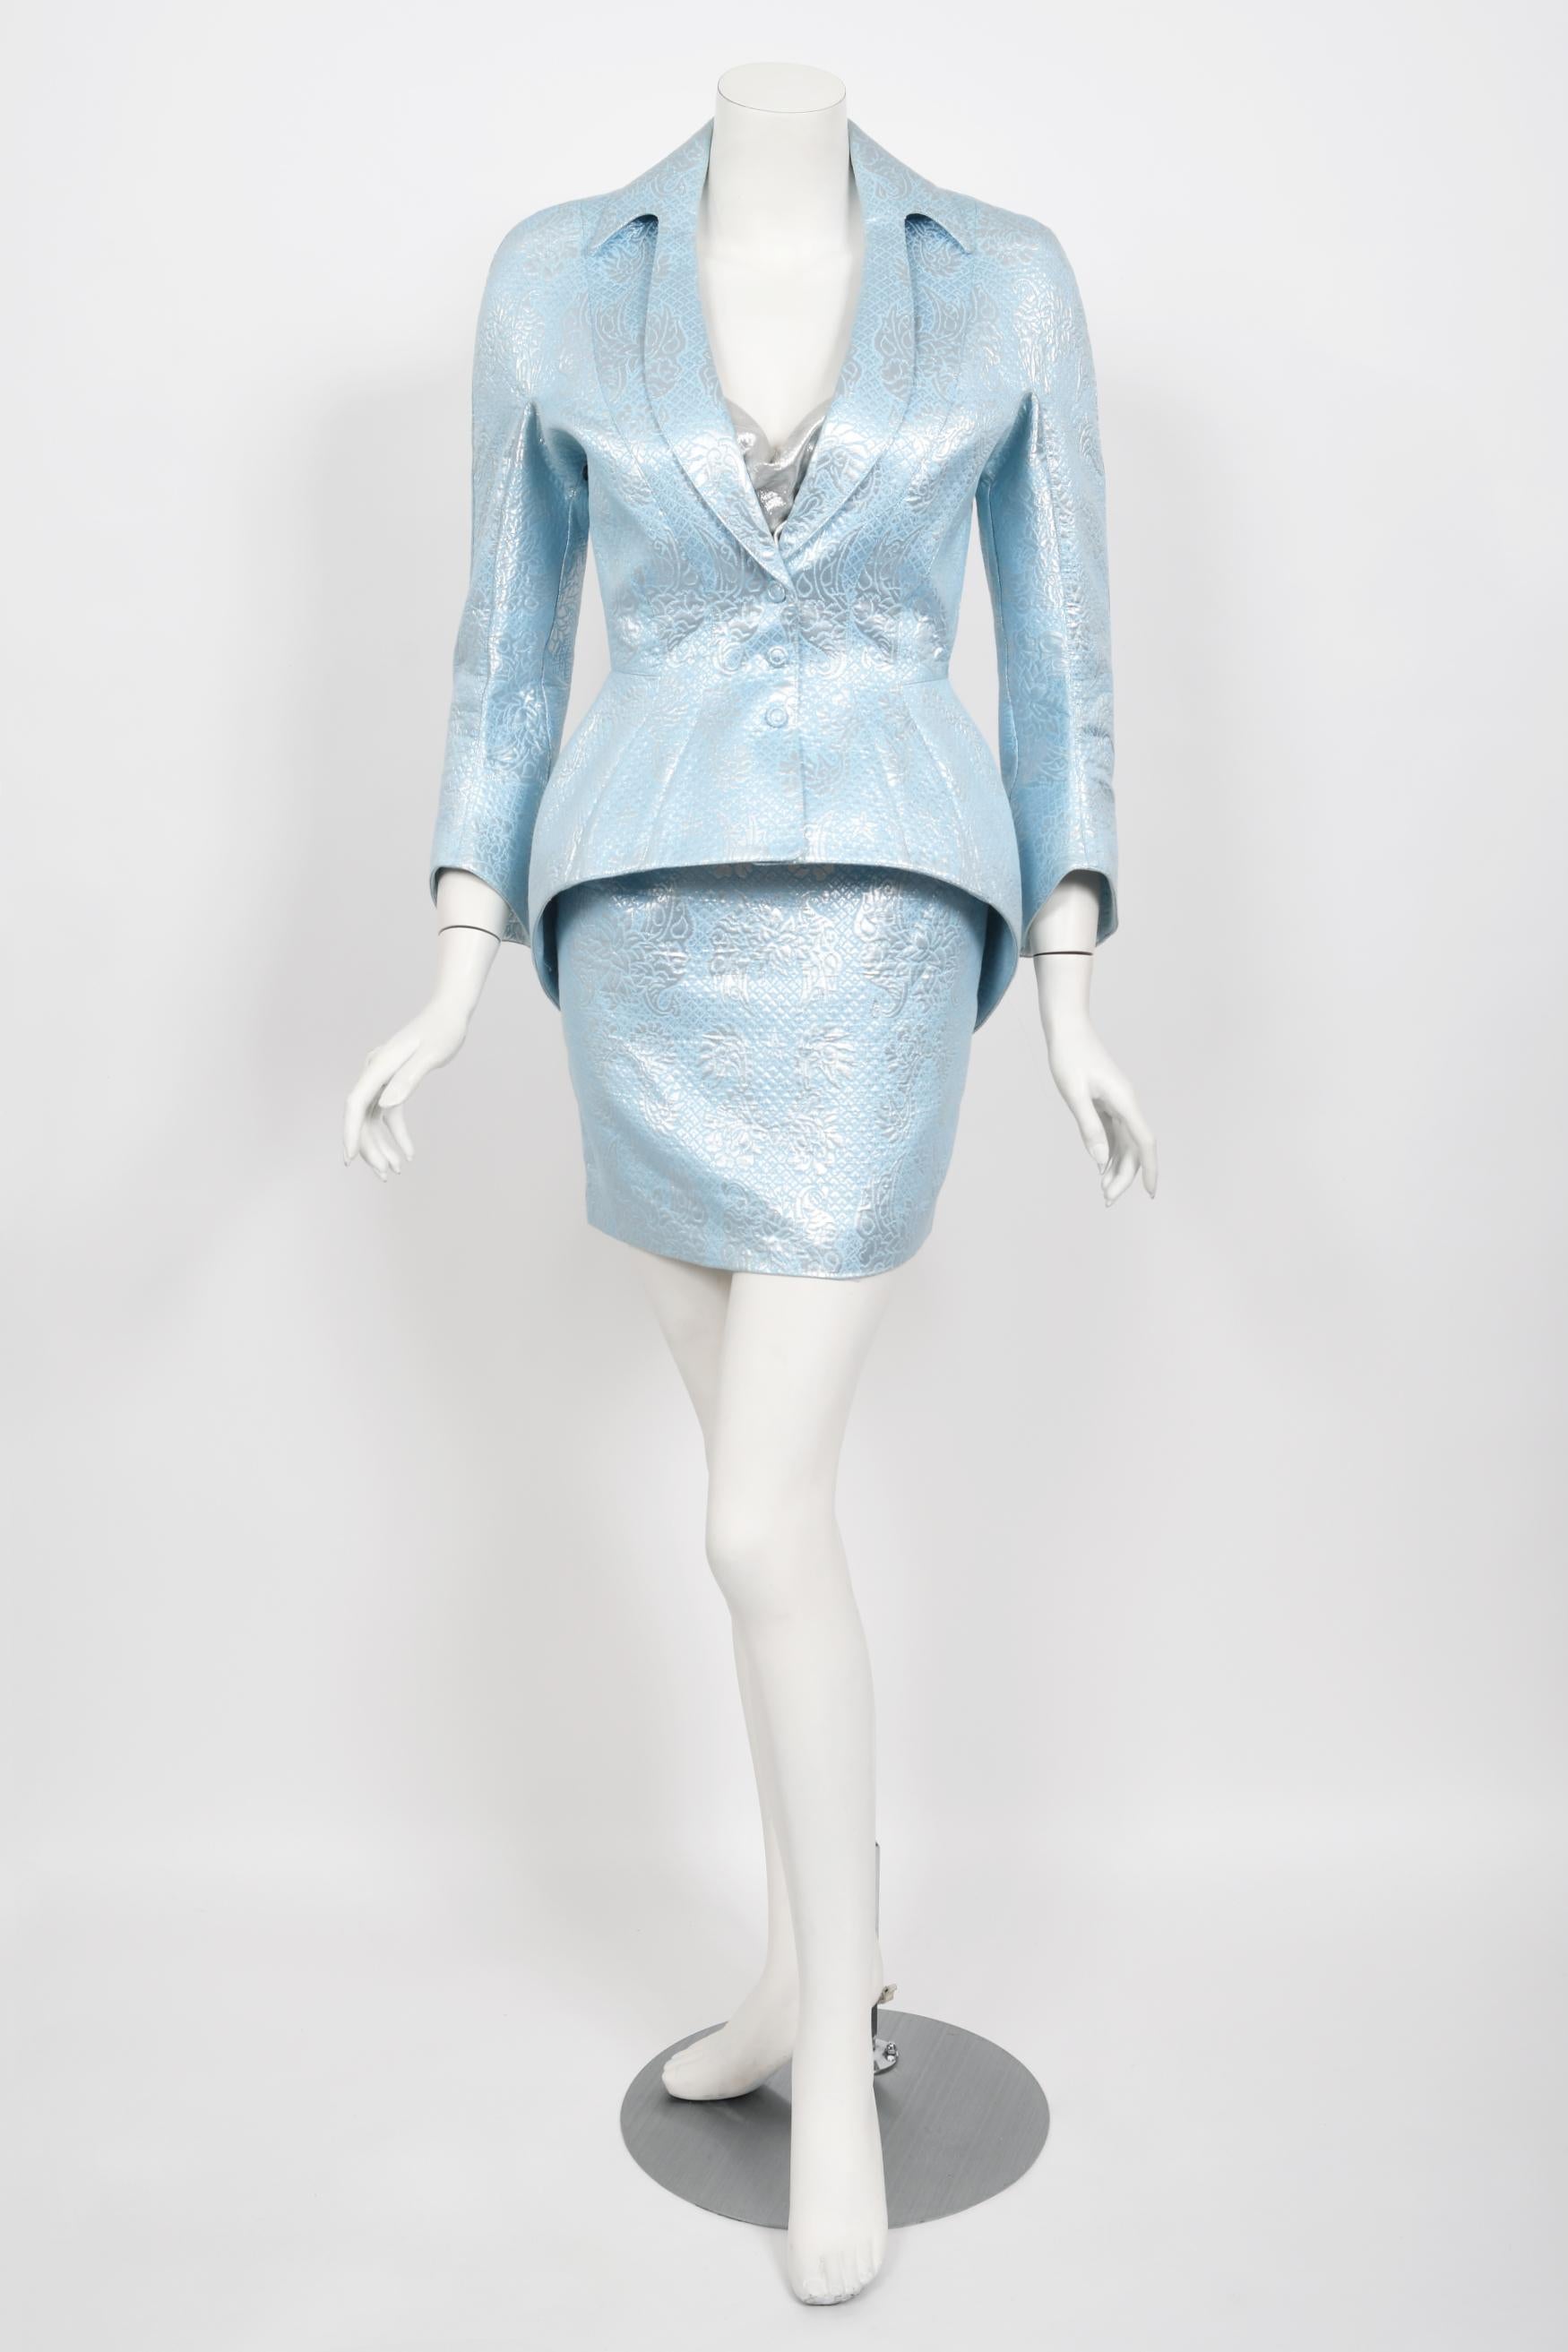 Iconic 1992 Thierry Mugler Couture Metallic Silver Blue Bustier Mini Skirt Suit 1